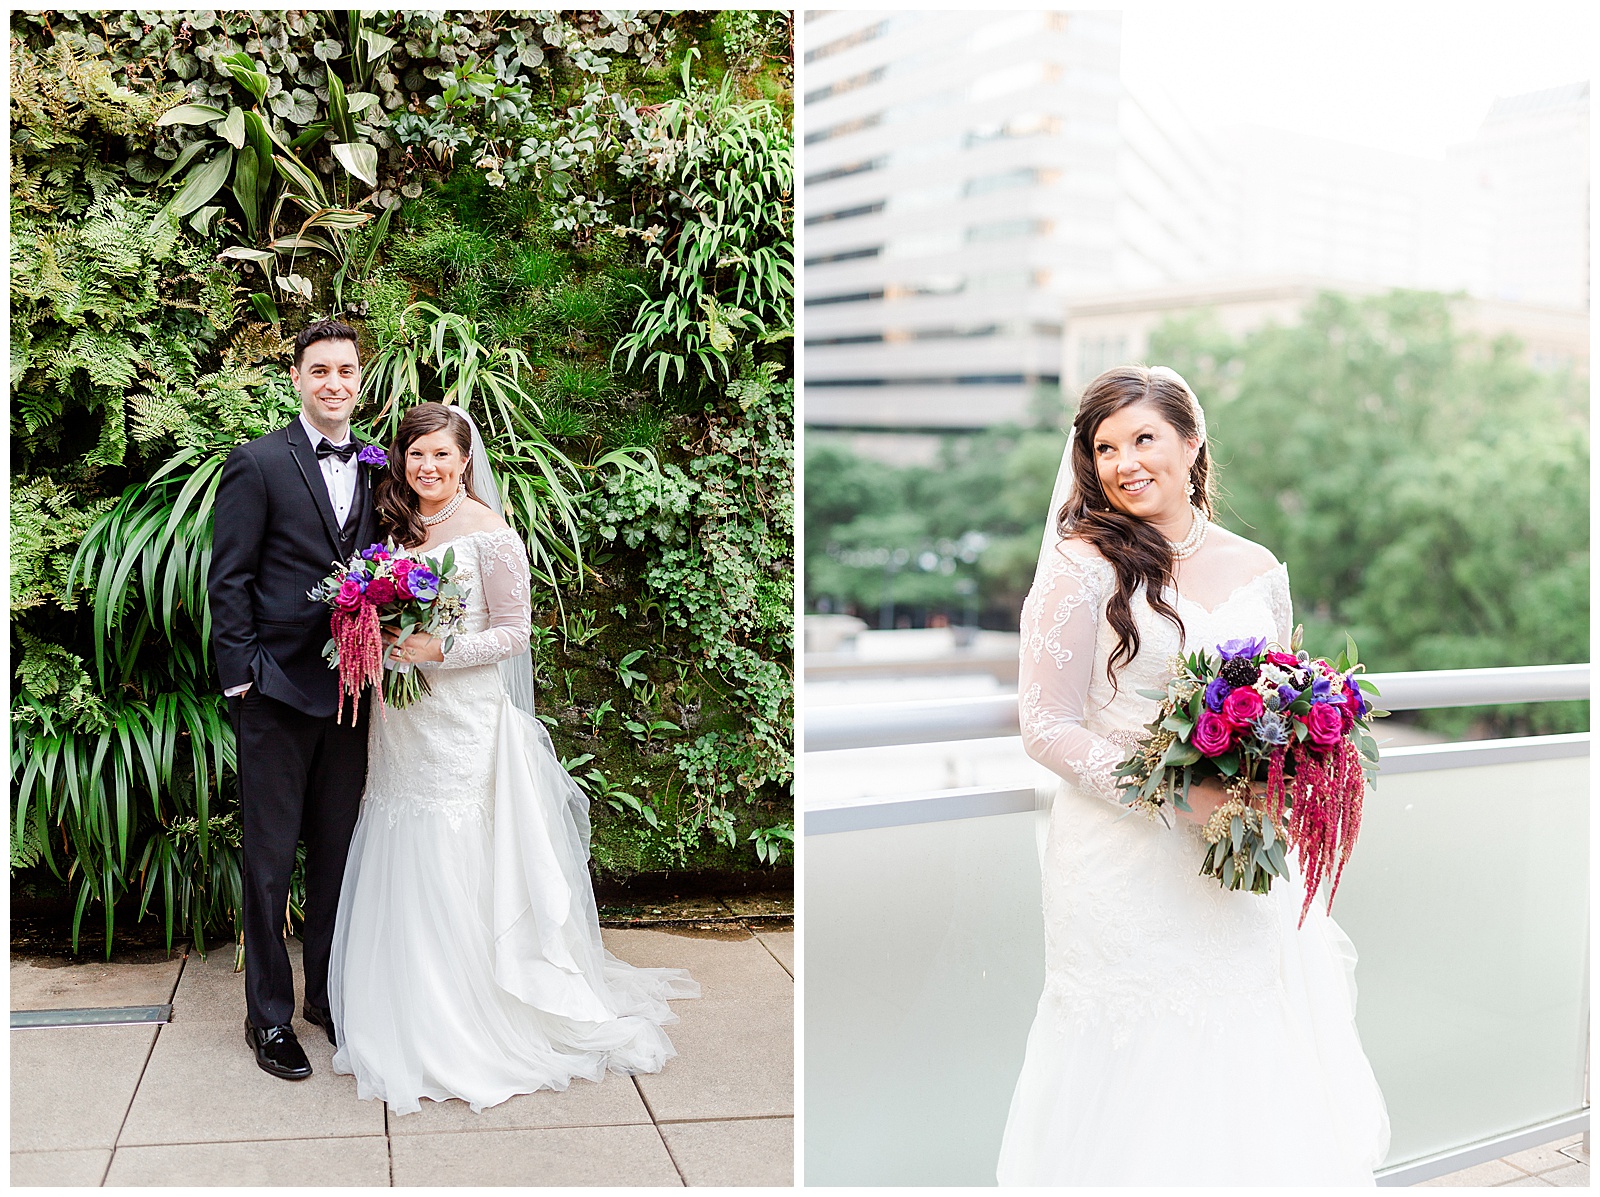 💍 bride groom outdoor wedding portraits in front of gorgeous wall of greenery florals and downtown city bridals 👰 Bride: lace wedding dress with rhinestone belt rhinestone barrette in hair down with pearls 🤵 Groom: black tux tuxedo and purple flower boutonnière 💍 Bright Colorful Summer City Wedding in Charlotte, NC with Taryn and Ryan | Kevyn Dixon Photography